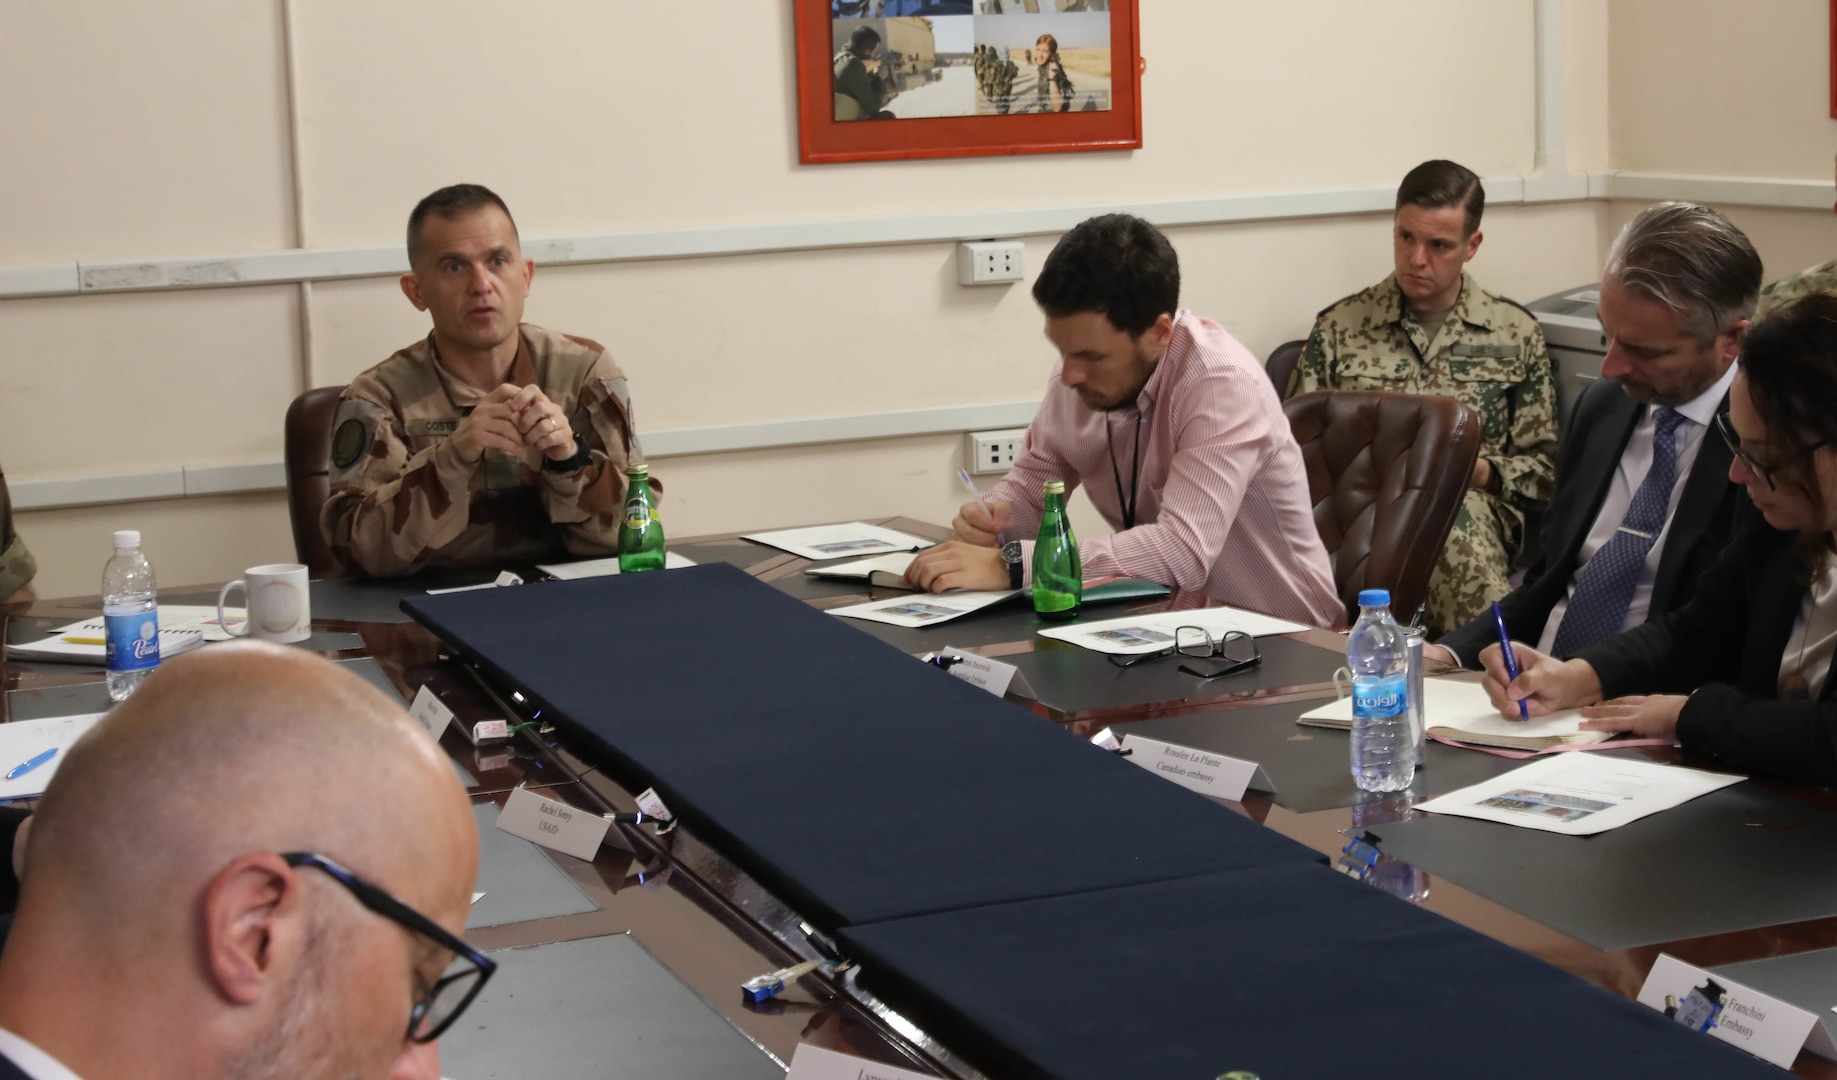 French Air Force Brig. Gen. Vincent Coste (center), the director of Combined Joint Task Force – Operation Inherent Resolve’s (CJTF-OIR) Directorate of Civil Environment, briefs Ambassadorial representatives and aides from multiple Coalition countries about the importance of finding solutions for finding solutions for successfully repatriating individually displaced persons from IDP camps in Iraq and northeast Syria during a meeting June 27, 2022, at Union III forward operating base, in Baghdad, Iraq. The meeting also enabled the DICE team to update the embassy representatives on the current programs and future plans for CJTF-OIR’s advise, assist and enable mission and the Coalition’s role in helping our partners create security and stability in the region. (U.S. Army photo by Sgt. Brian Reed)